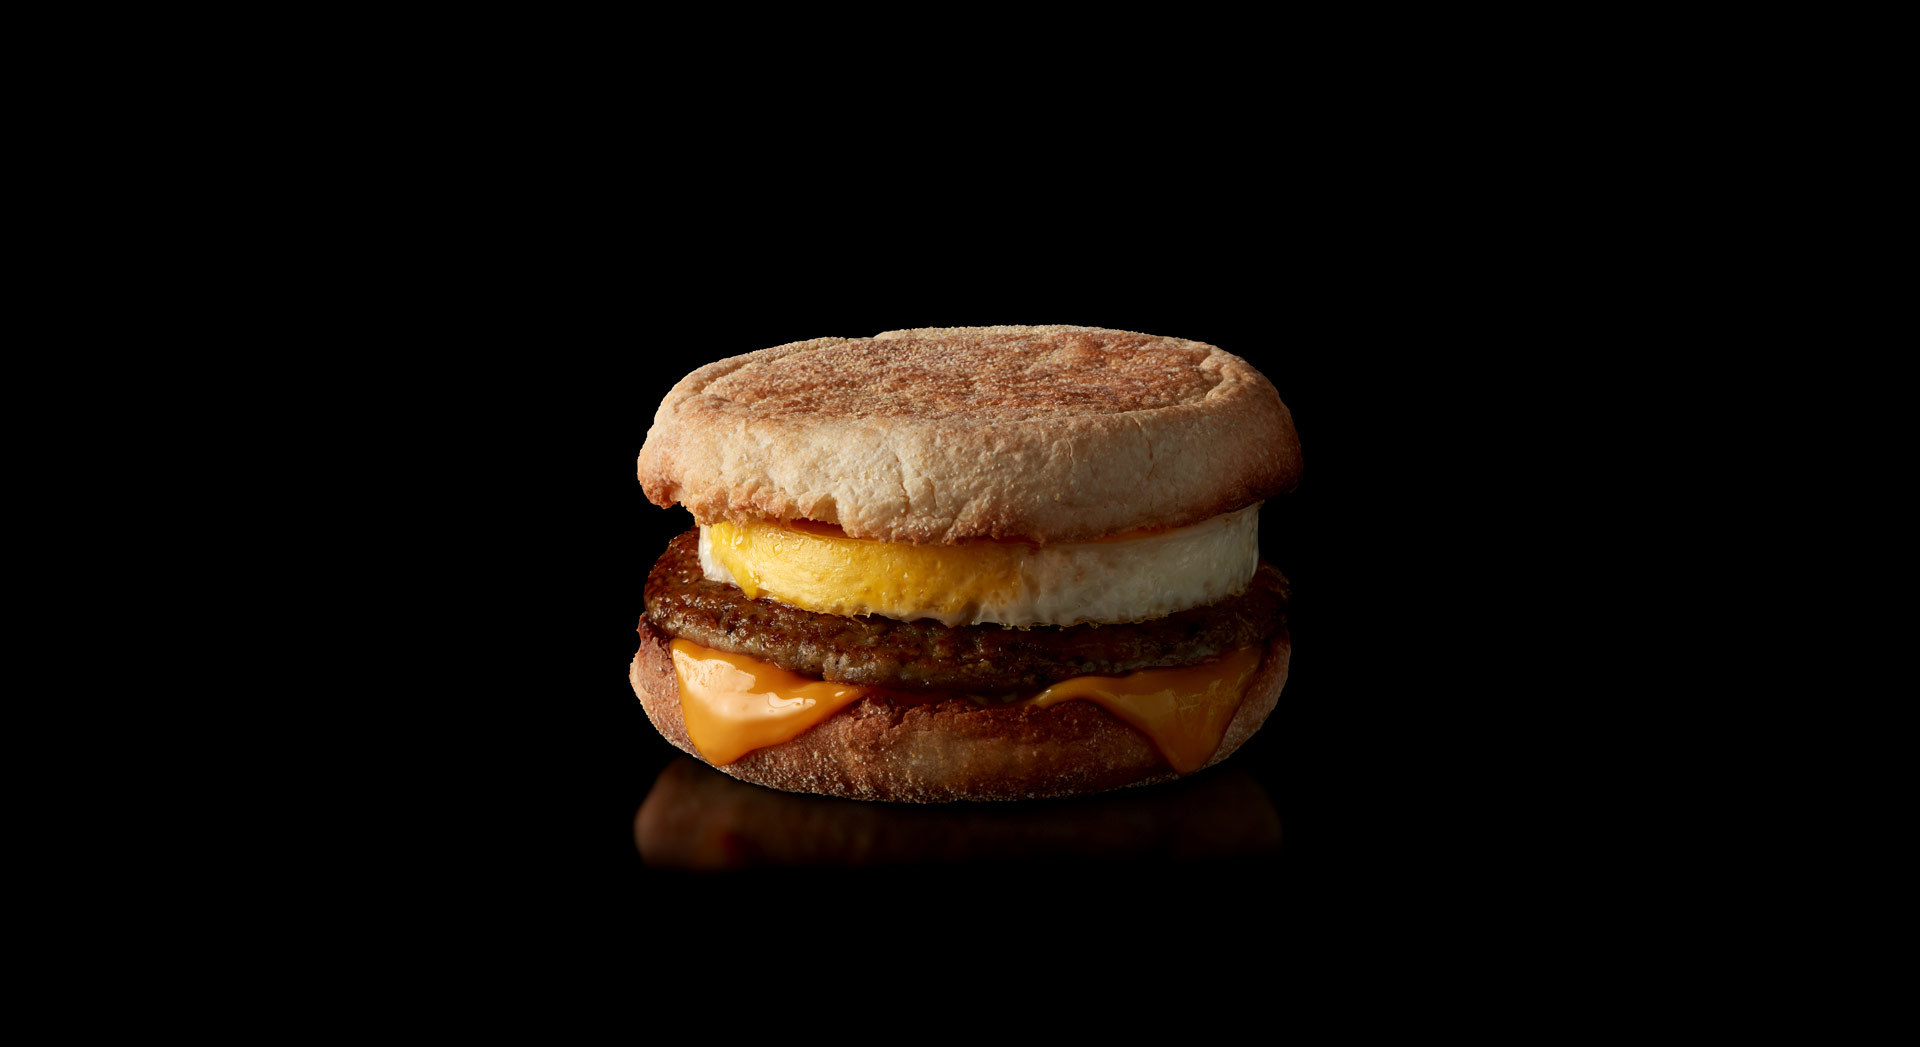 Know Our Food - Where do McDonald's get their sausage patties from?